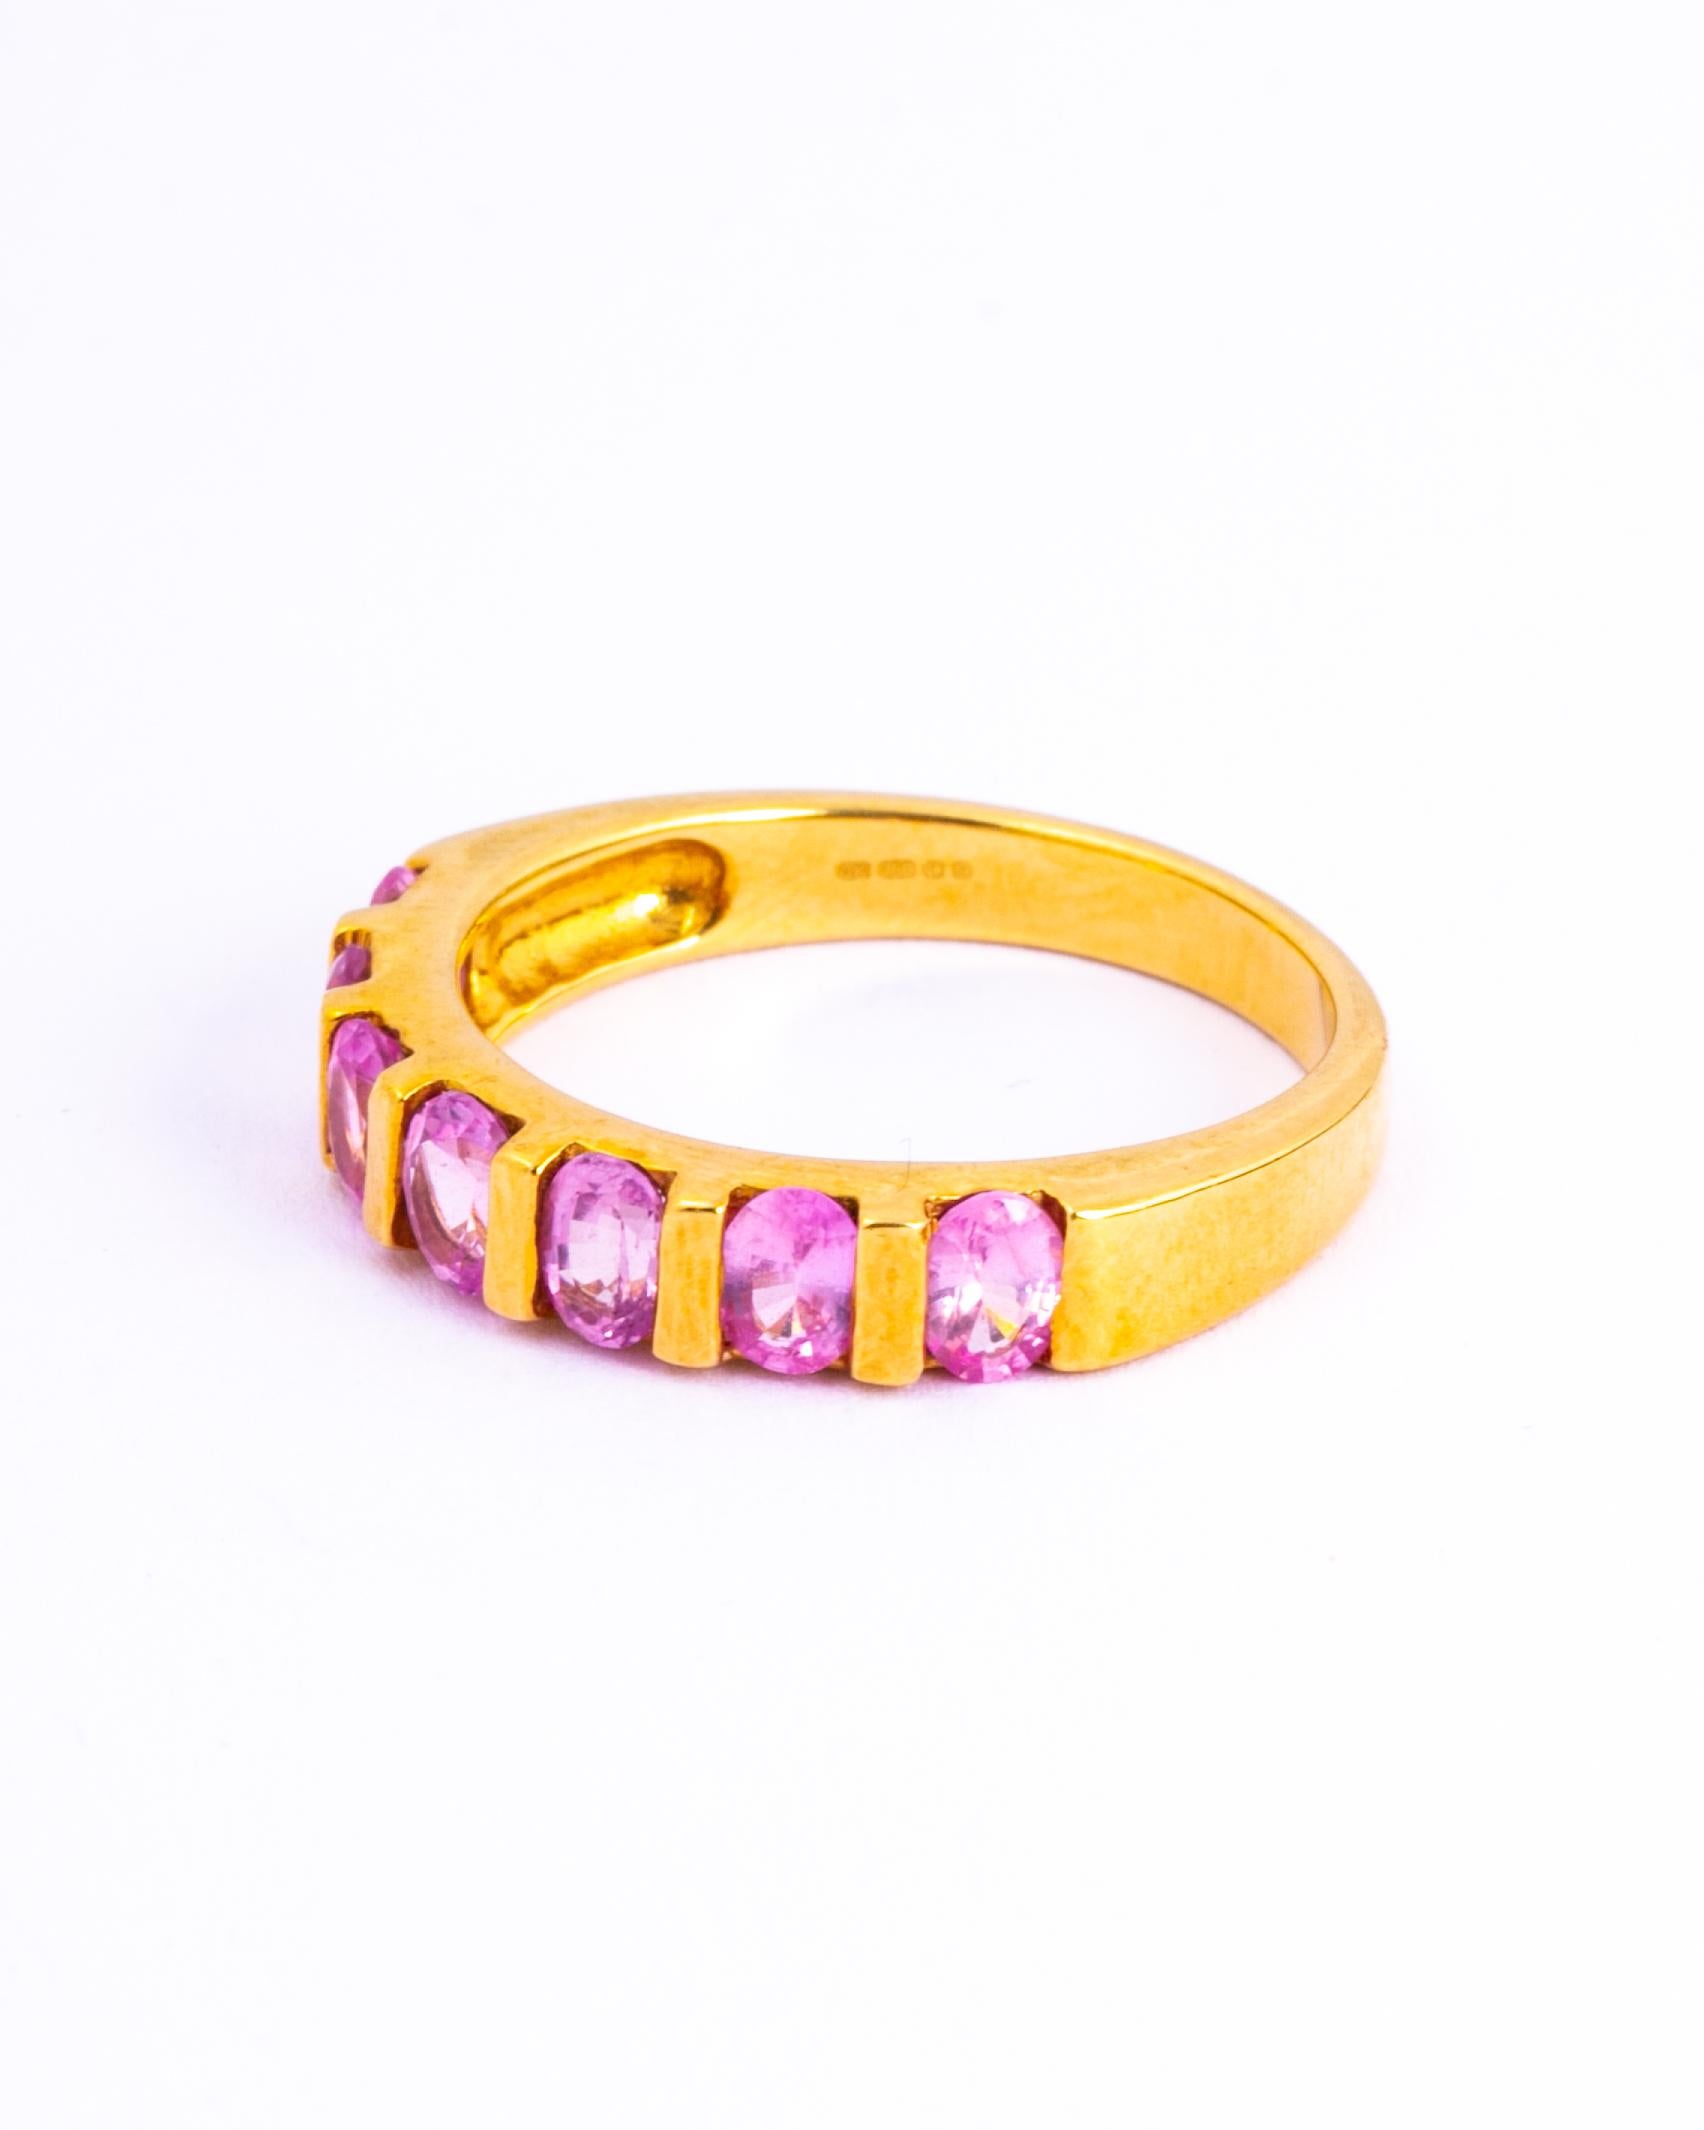 The style of this ring is absolutely fabulous! The 20pt stones are set in settings that enable you to see all of the the stunning pink tourmaline stones. The ring is modelled in 18ct gold and this half eternity band has a wonderful sparkle. Made in